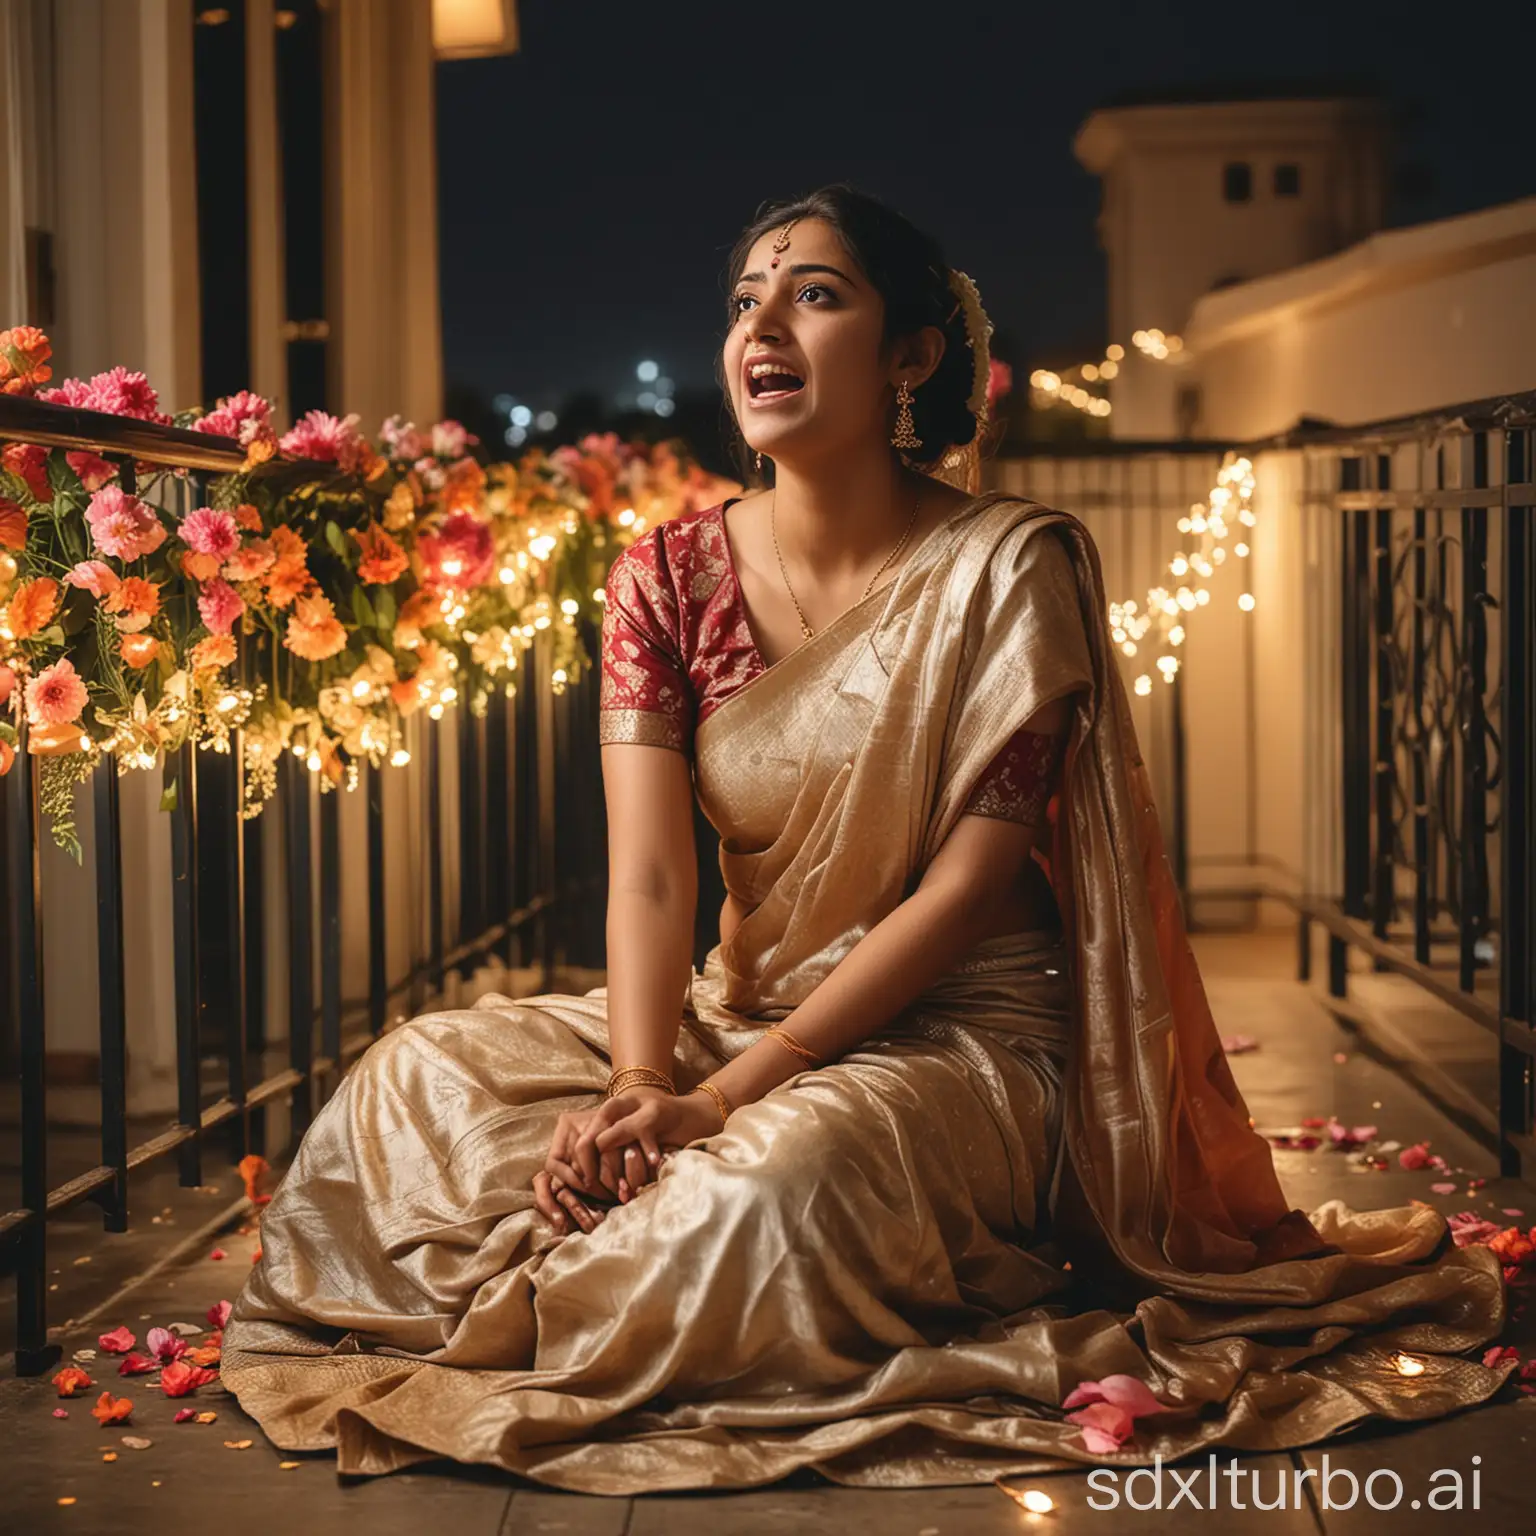 22 years old young pretty lady wearing silk saree bridal look, screaming in fear, sitting in the floor, at balcony decorated with flowers and lights, at night